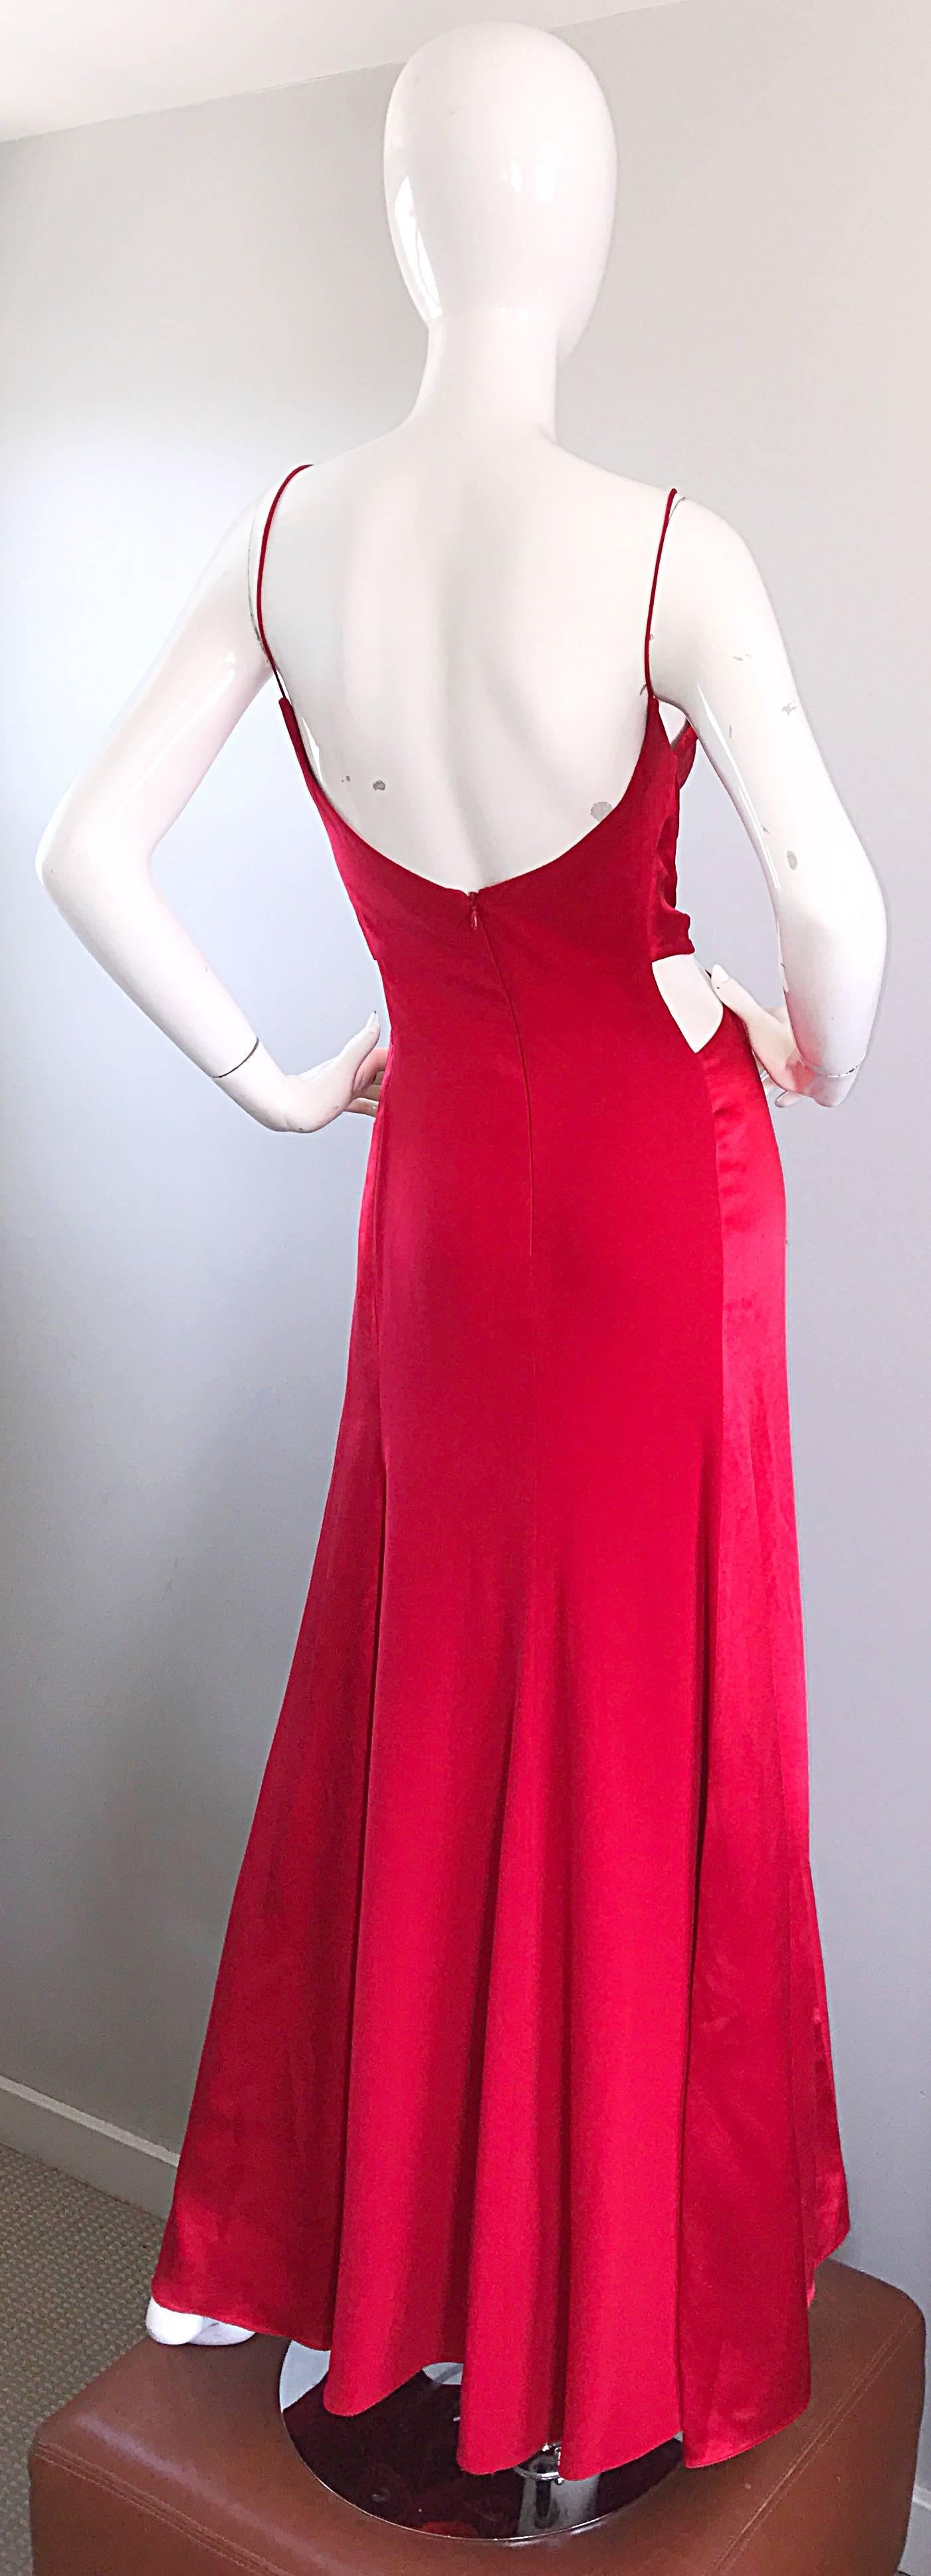 Beautiful sexy vintage 90s ANGEL SANCHEZ red silk and satin cut-out bias cut evening dress! Features a red silk body, with red satin bodice and side panels. Cut-outs at each side of the waist, and on the lower bodice. Hidden zipper up th eback with